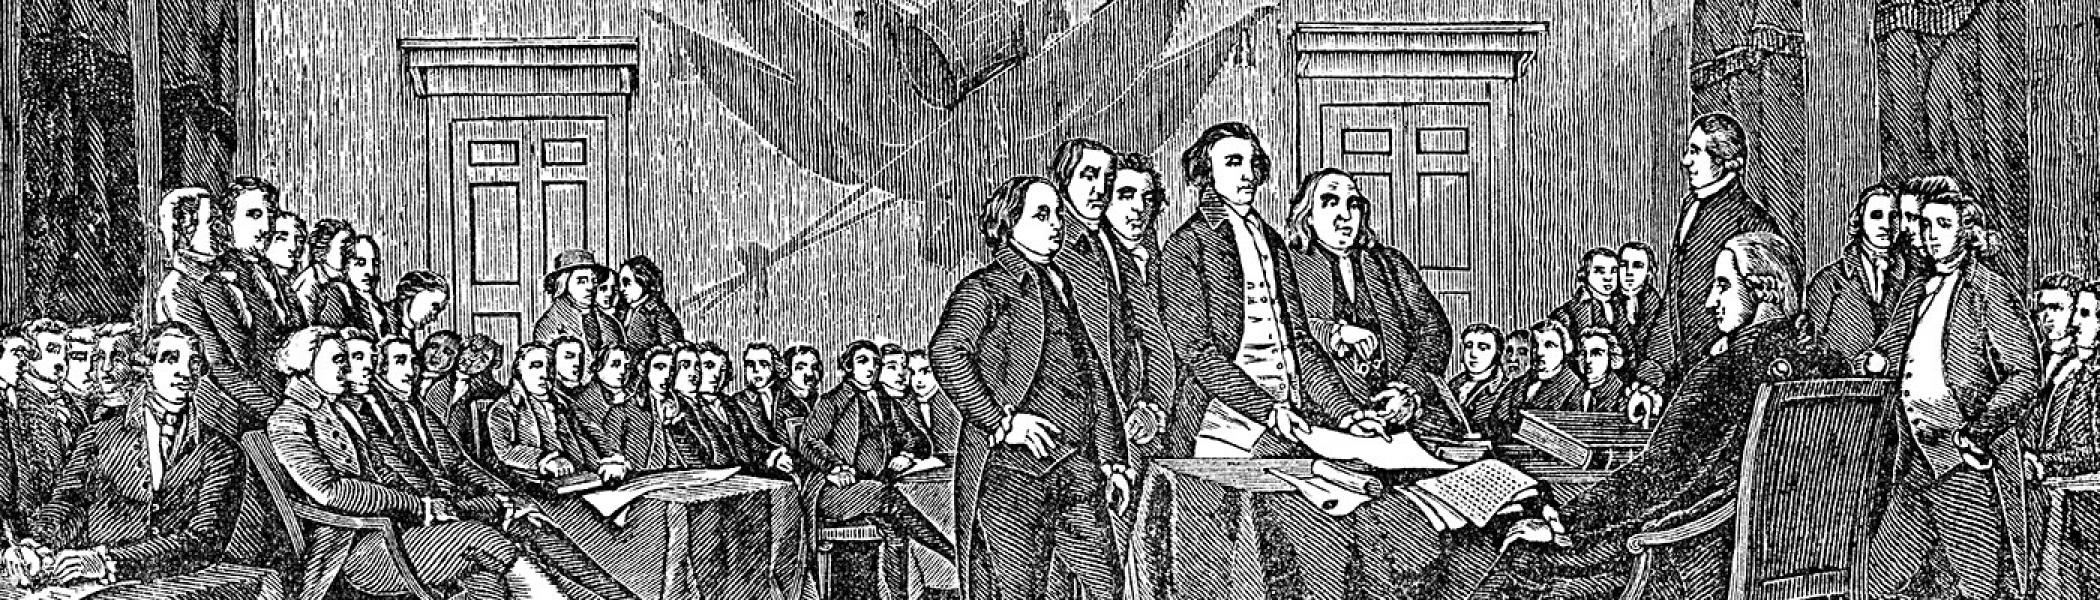 A black and white sketch of some officeres in uniform sitting in a large boardroom style room in the 1700's